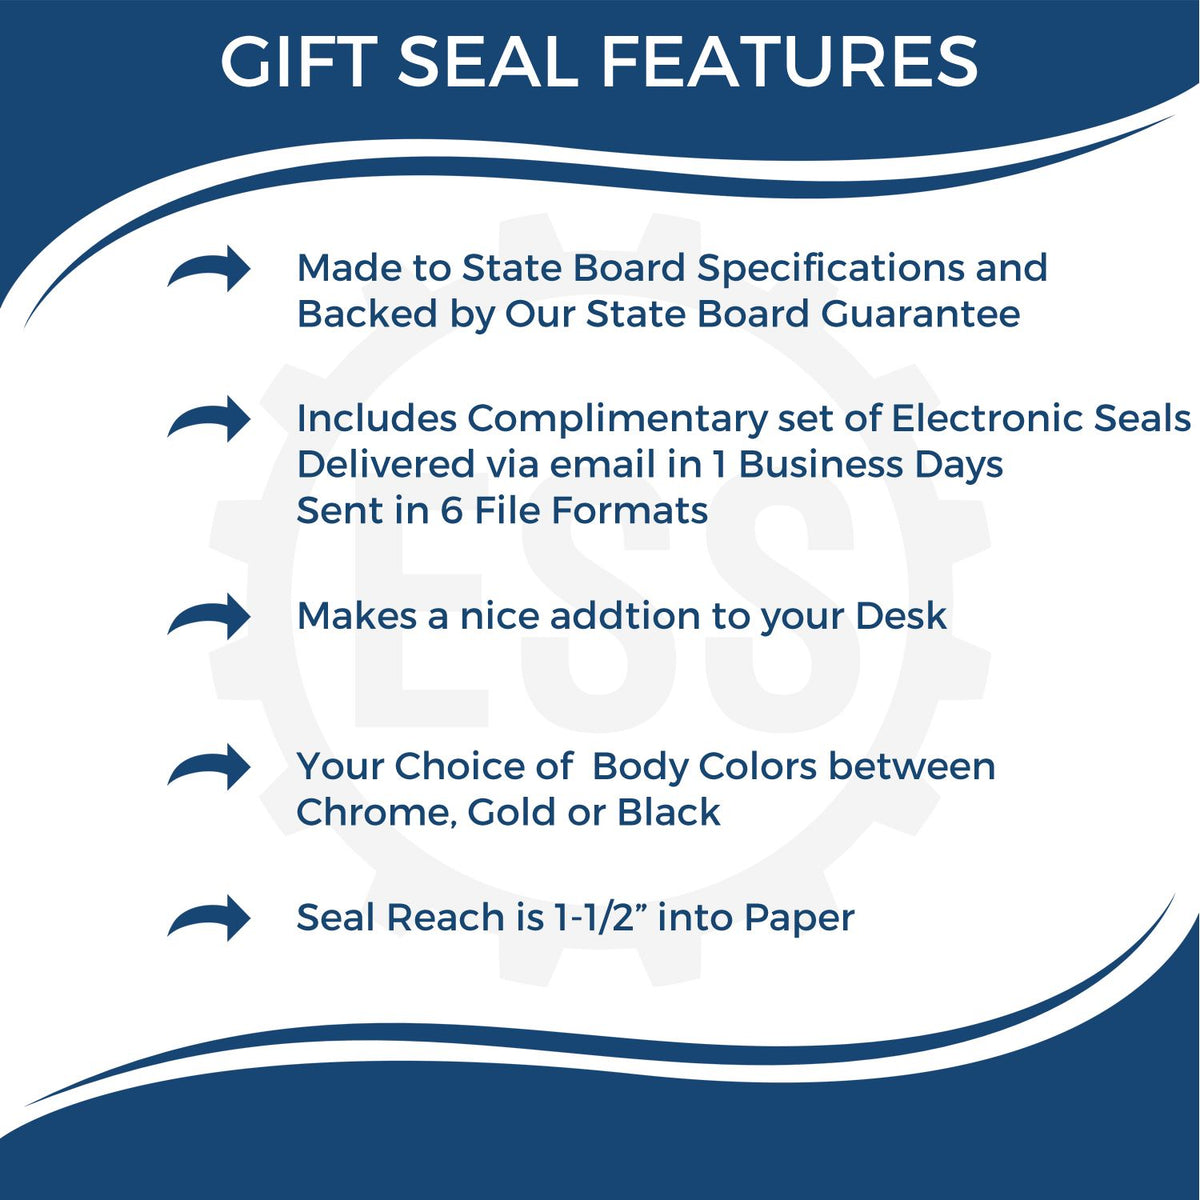 A picture of an infographic highlighting the selling points for the Gift Virginia Architect Seal